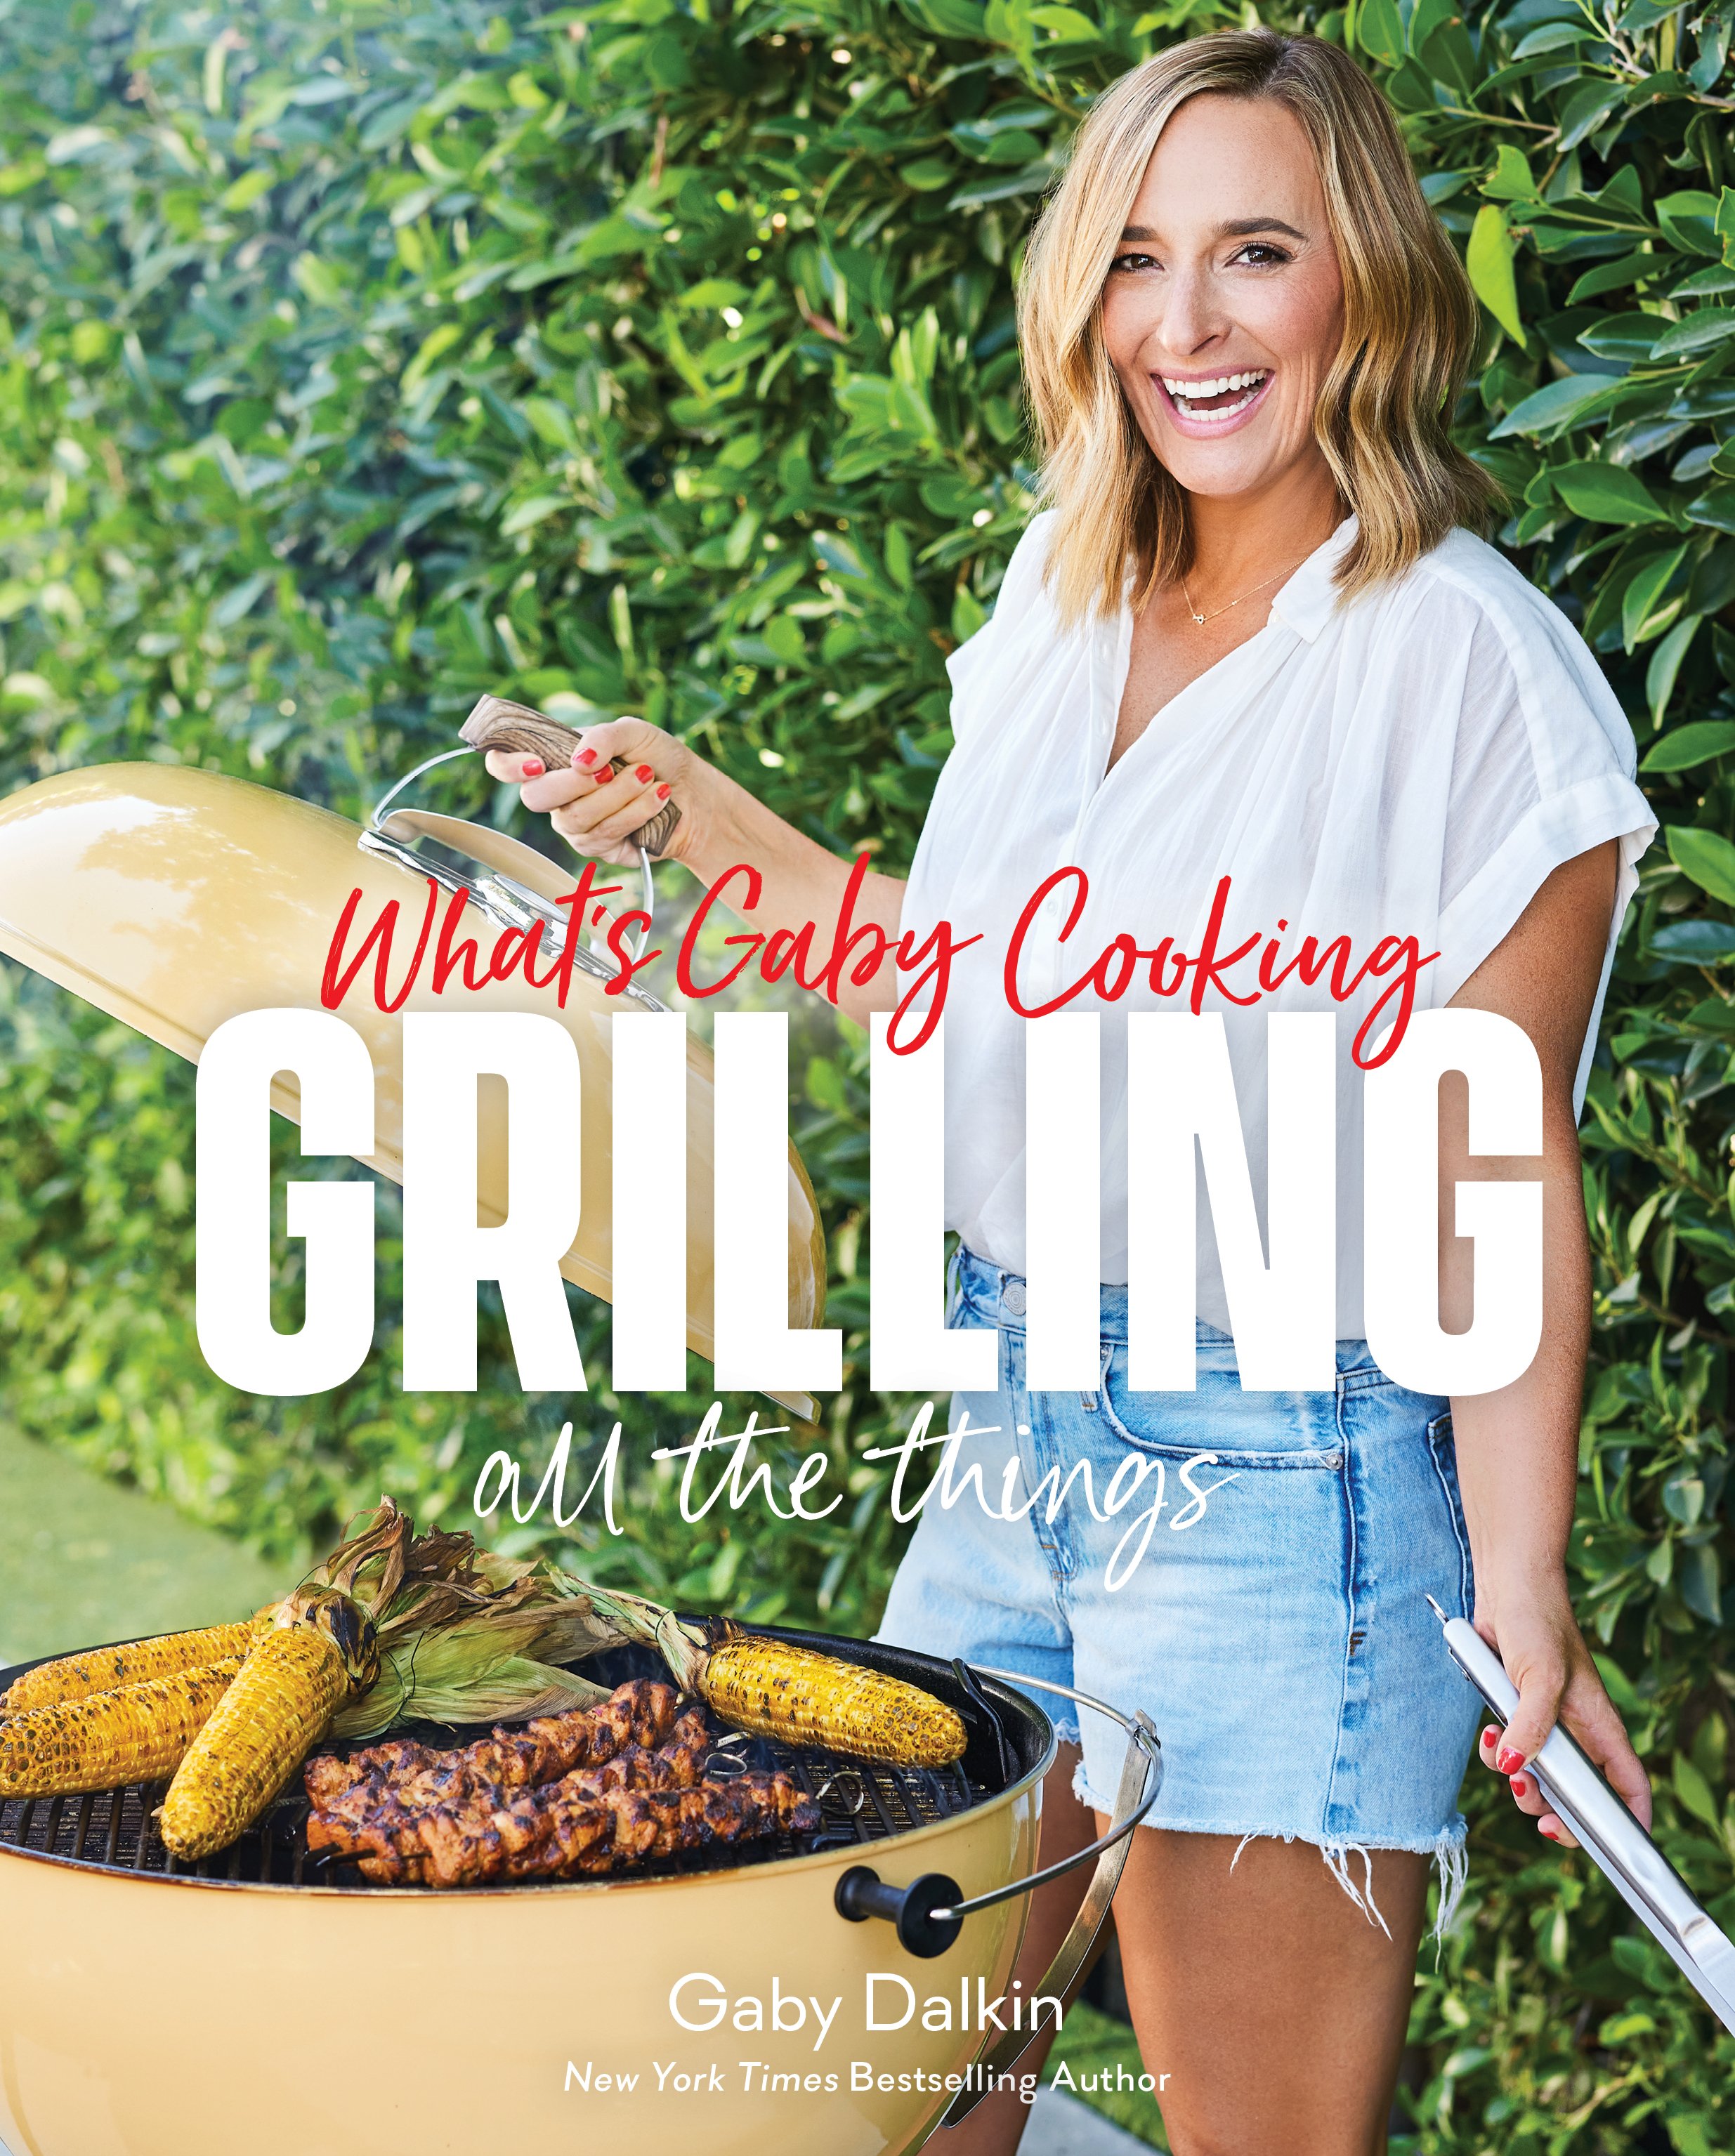 WGCGrilling_Cover.jpg